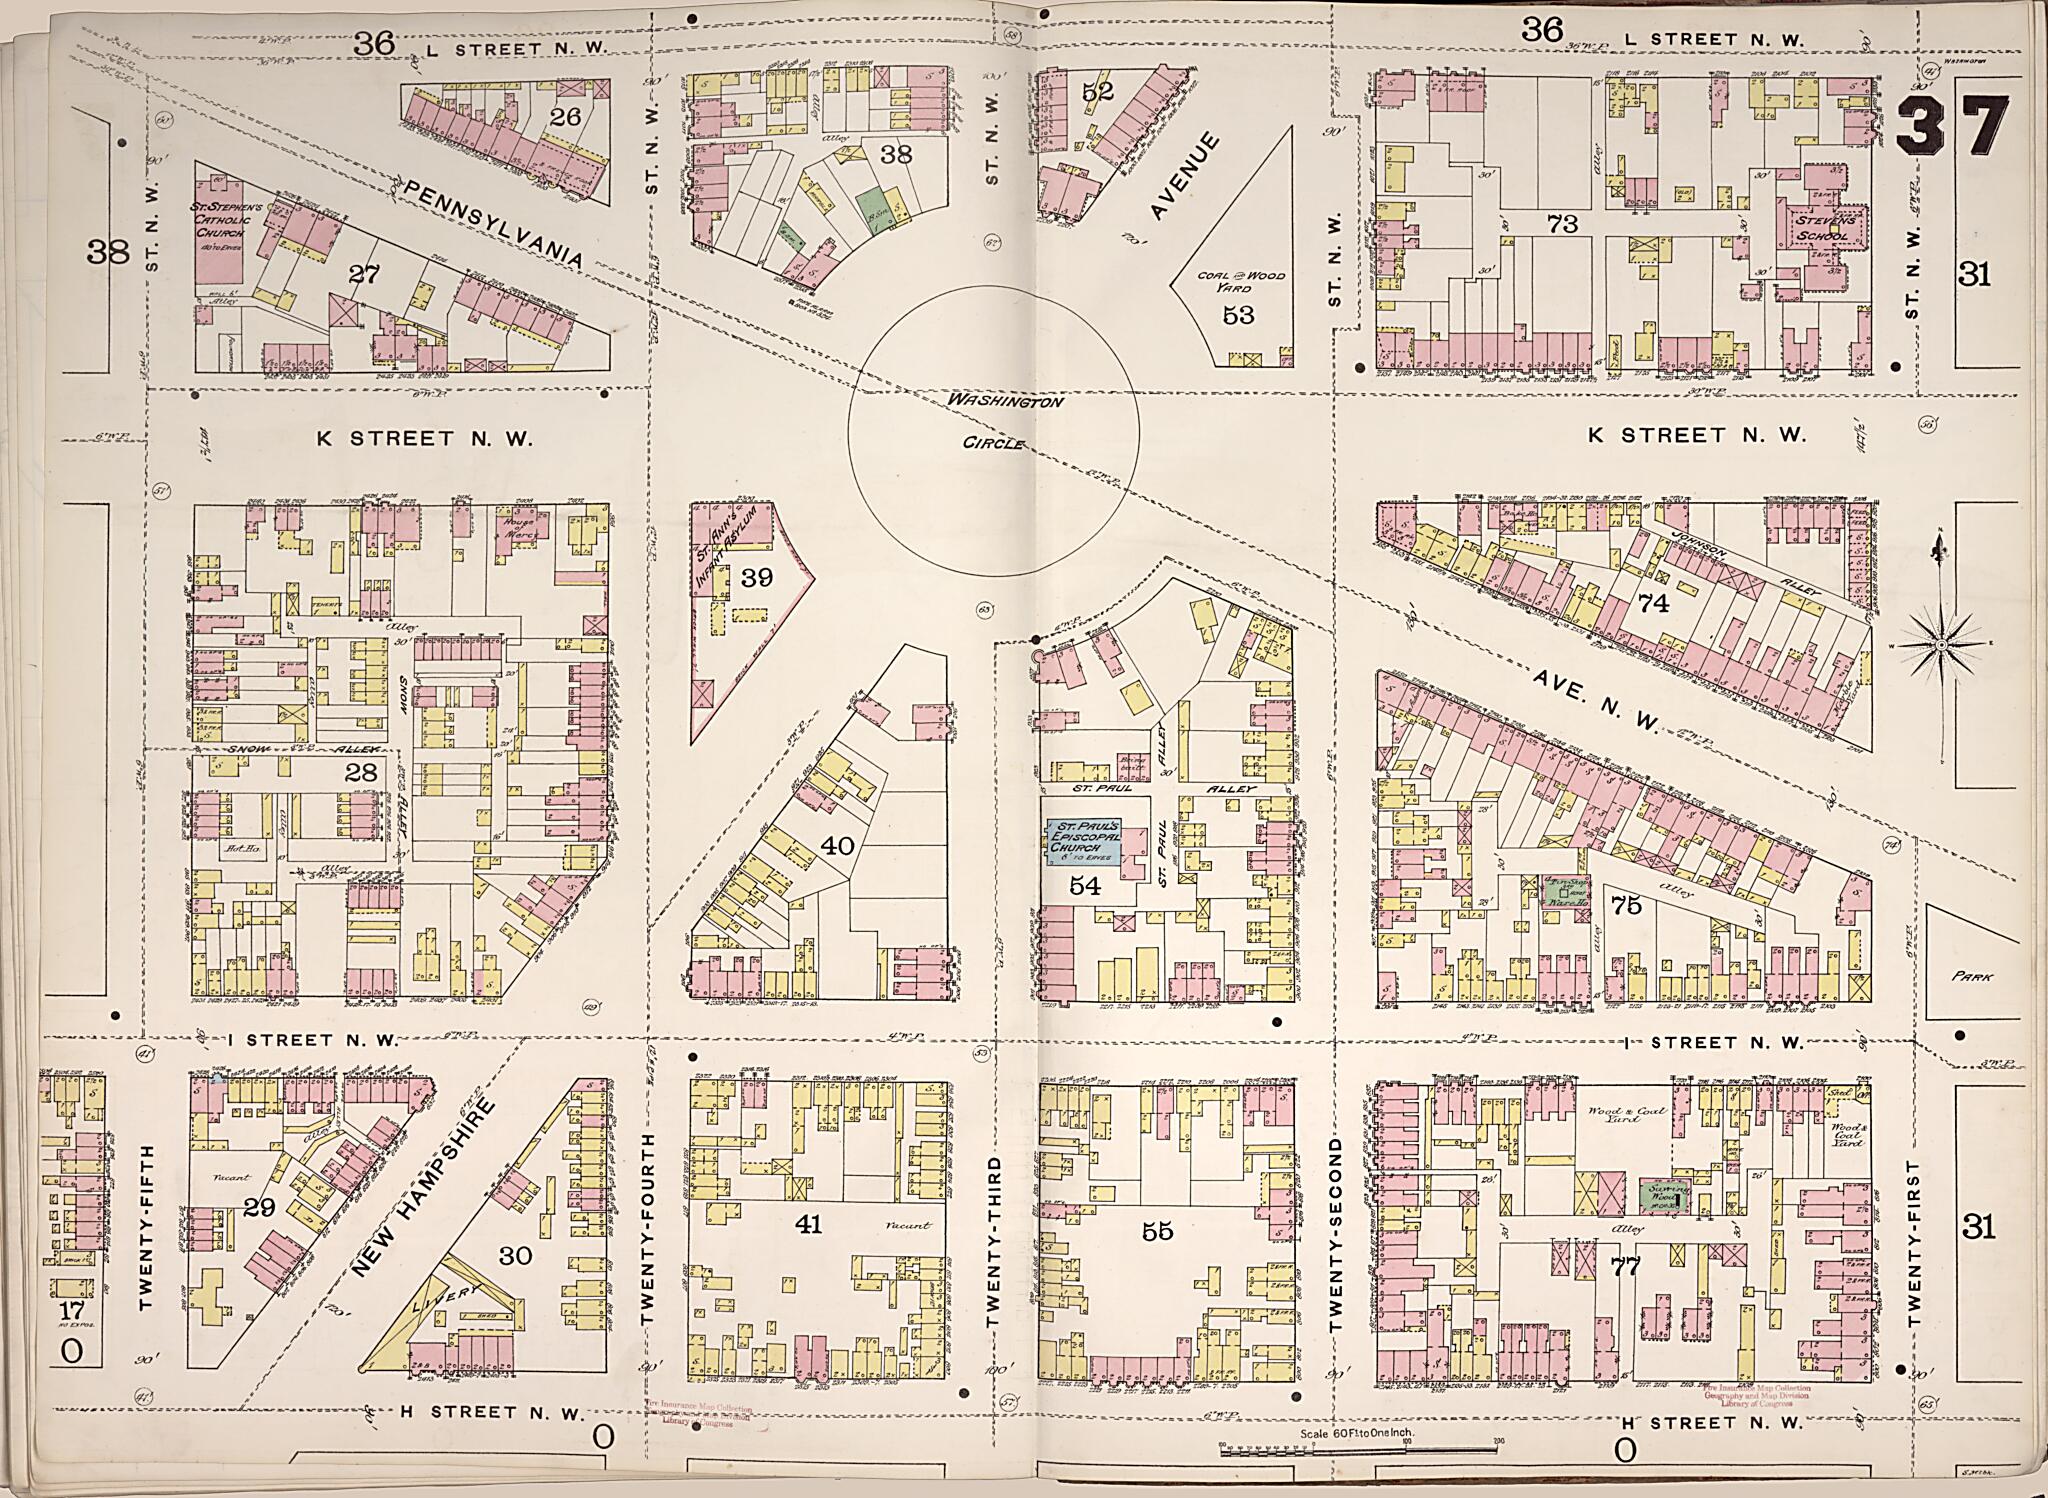 This old map of Washington D.C. was created by Sanborn Map Company in 1888